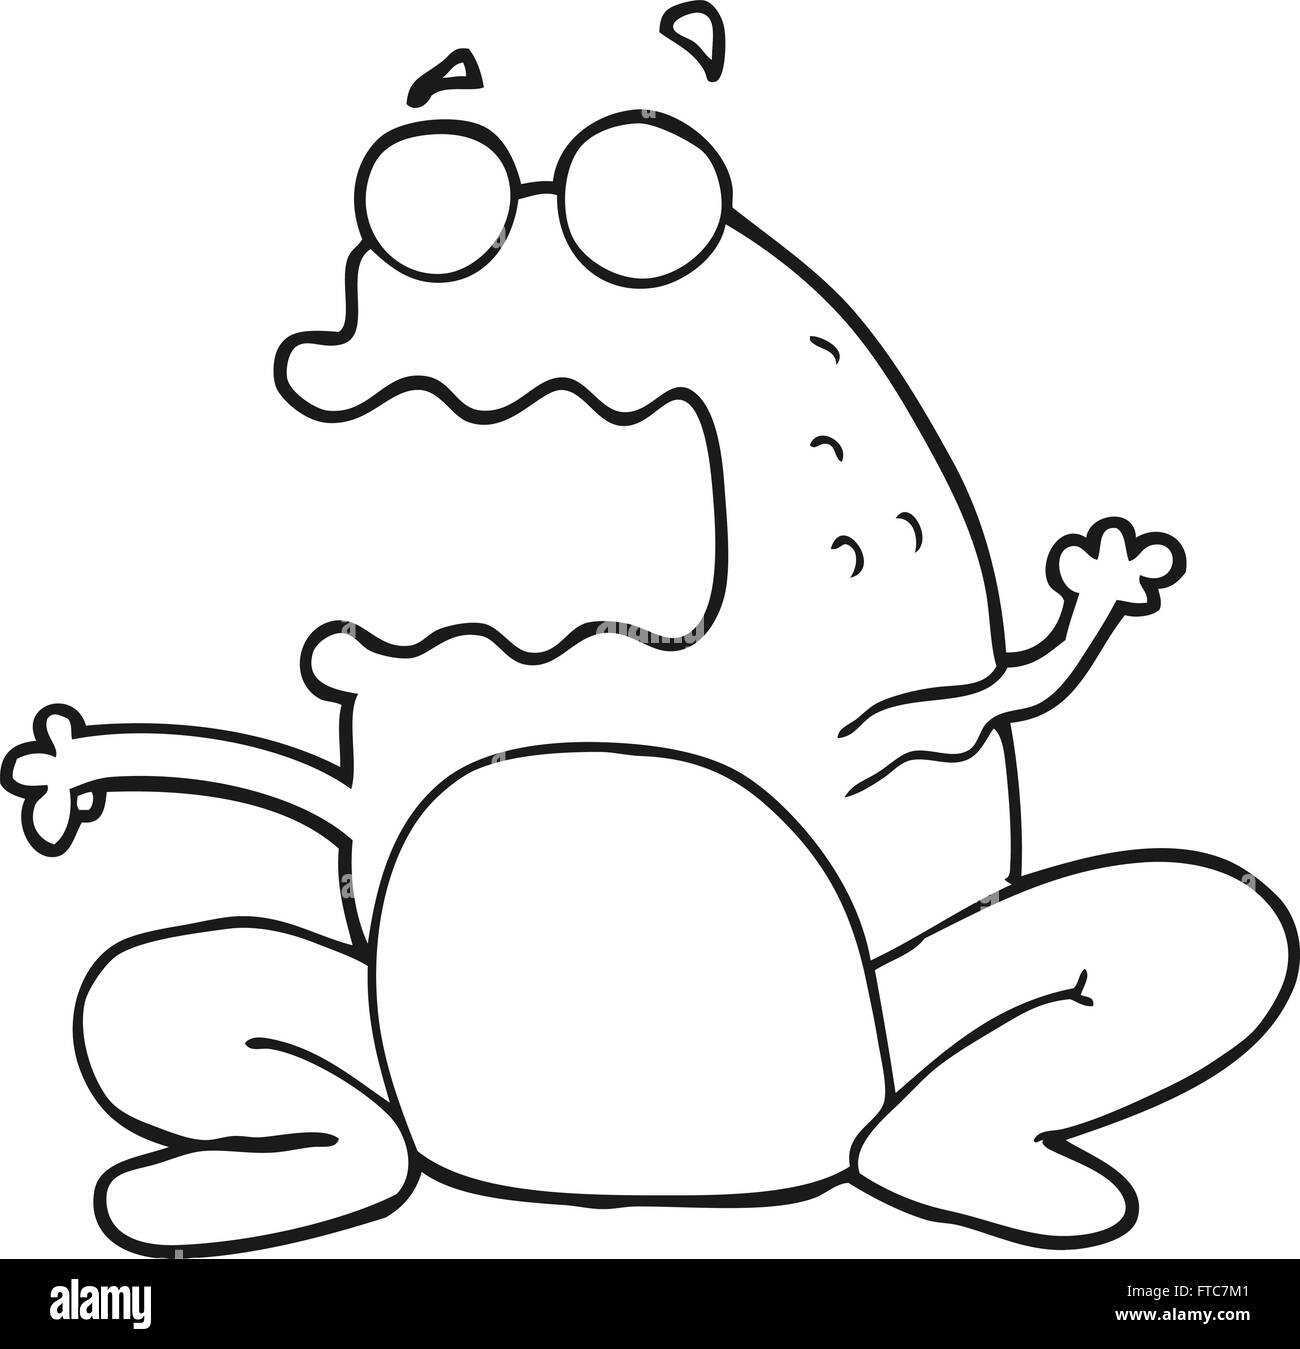 freehand drawn black and white cartoon burping frog Stock Vector